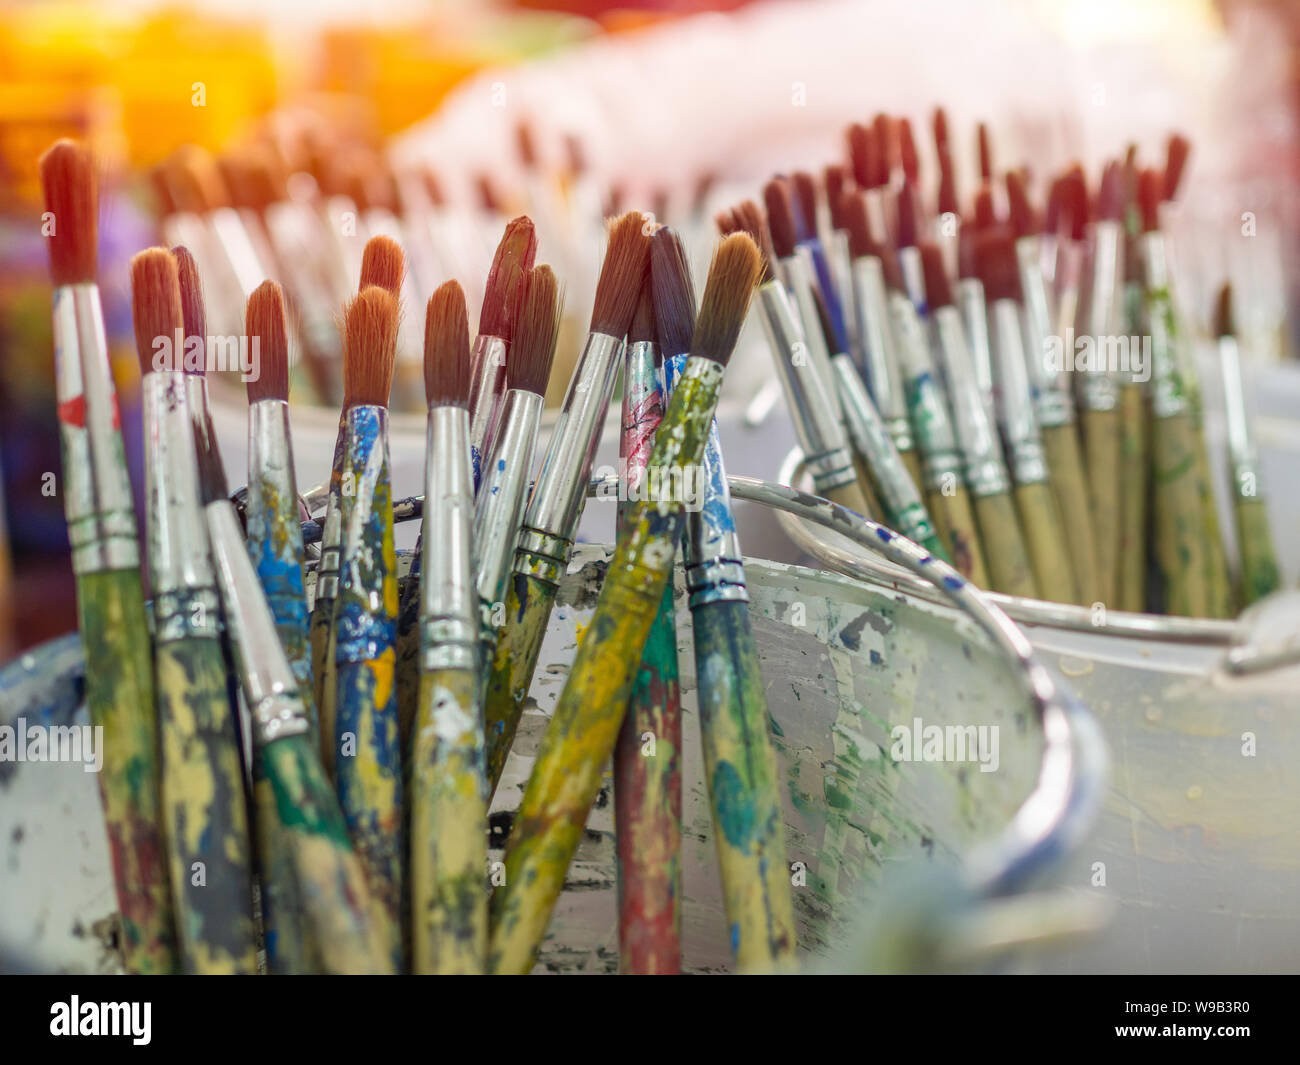 Brushes And Painting Equipment - Stock Photos